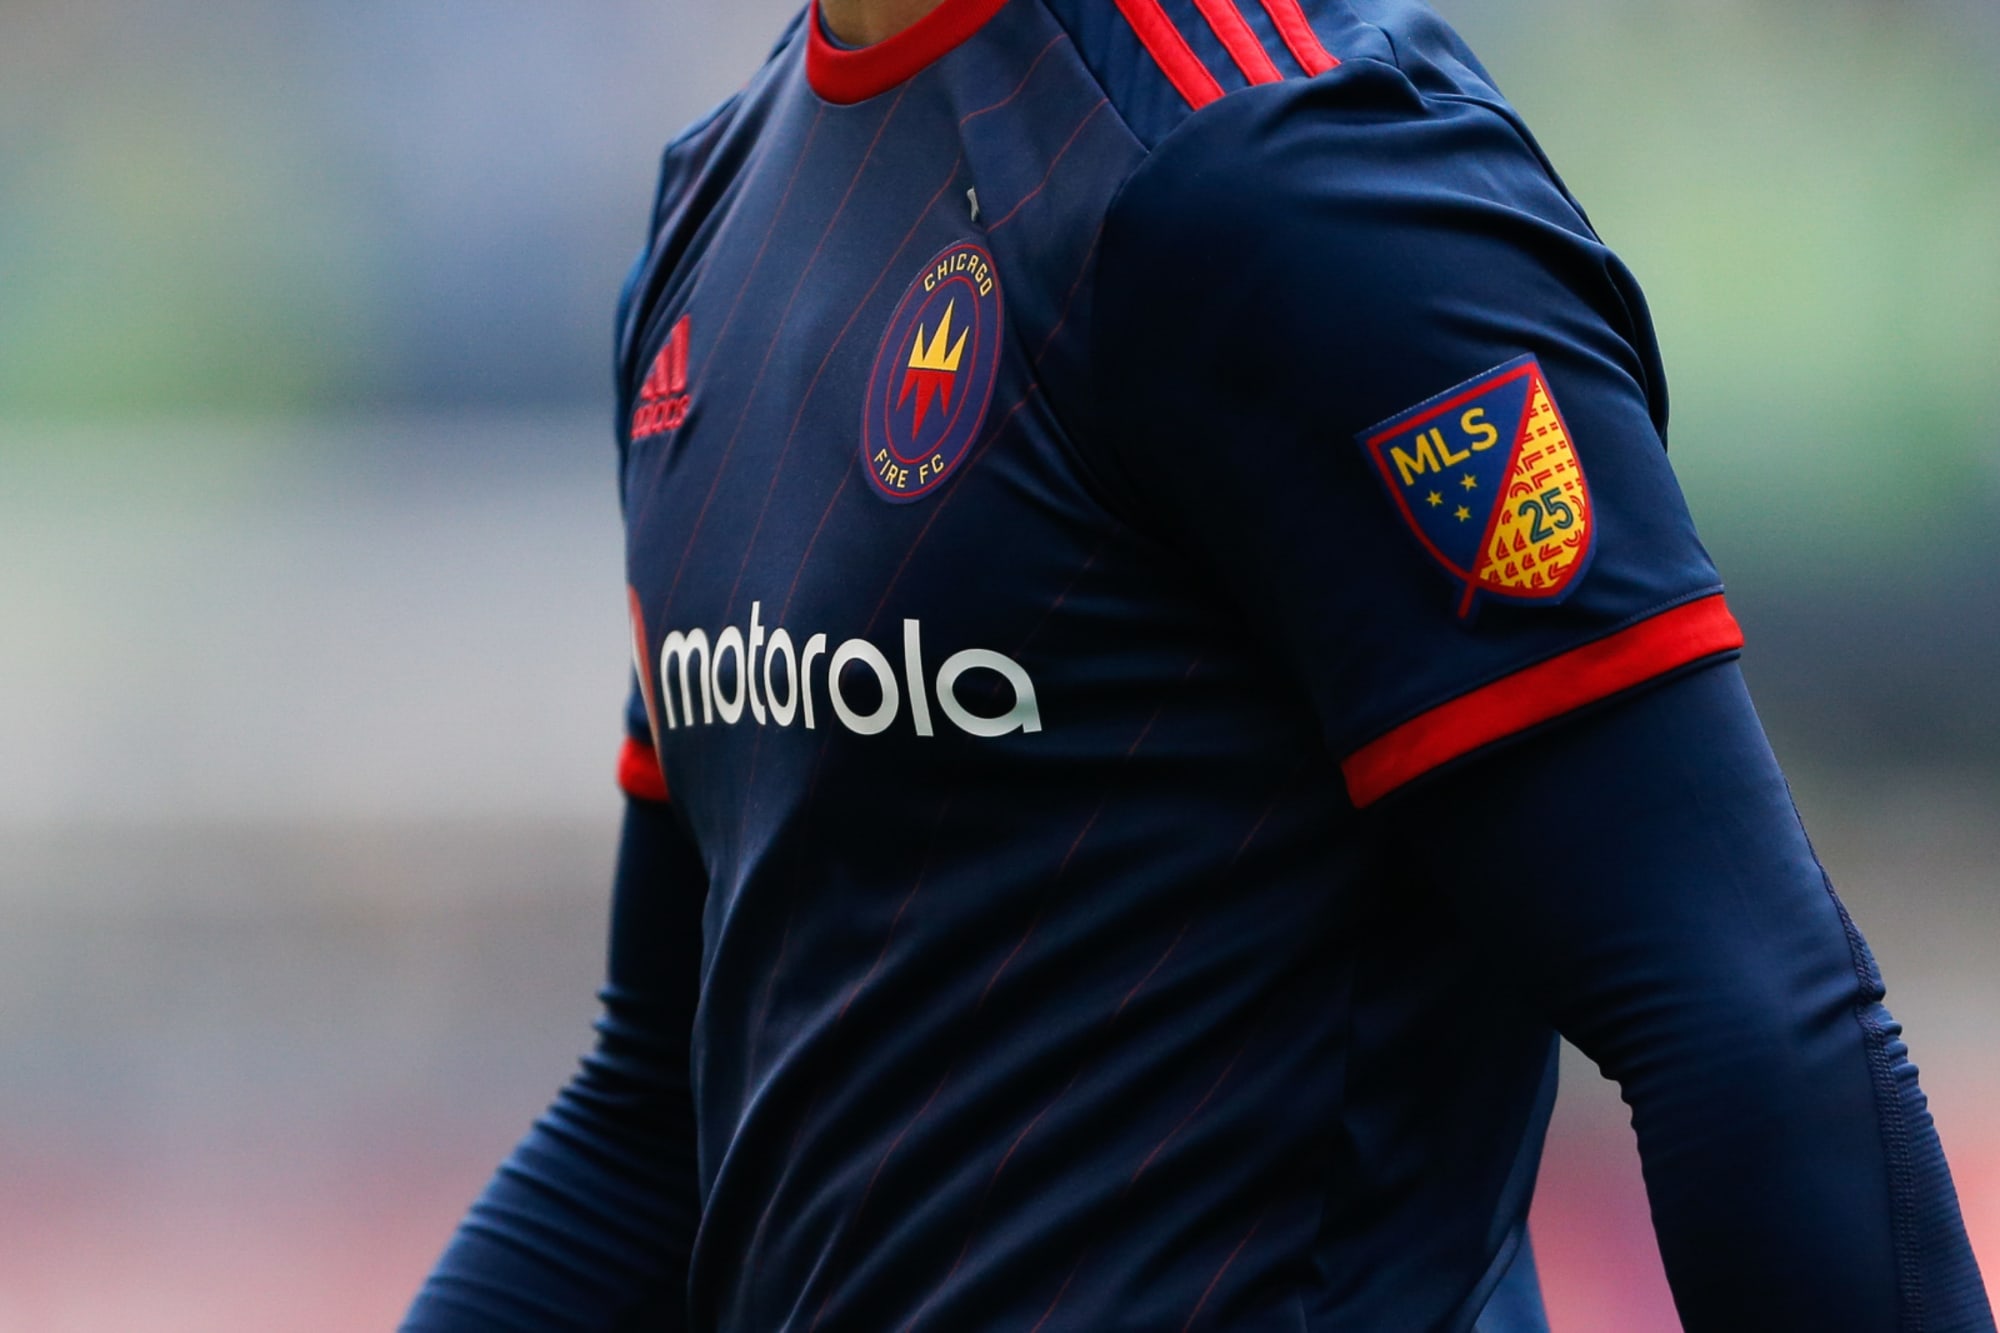 chicago fire fc jersey